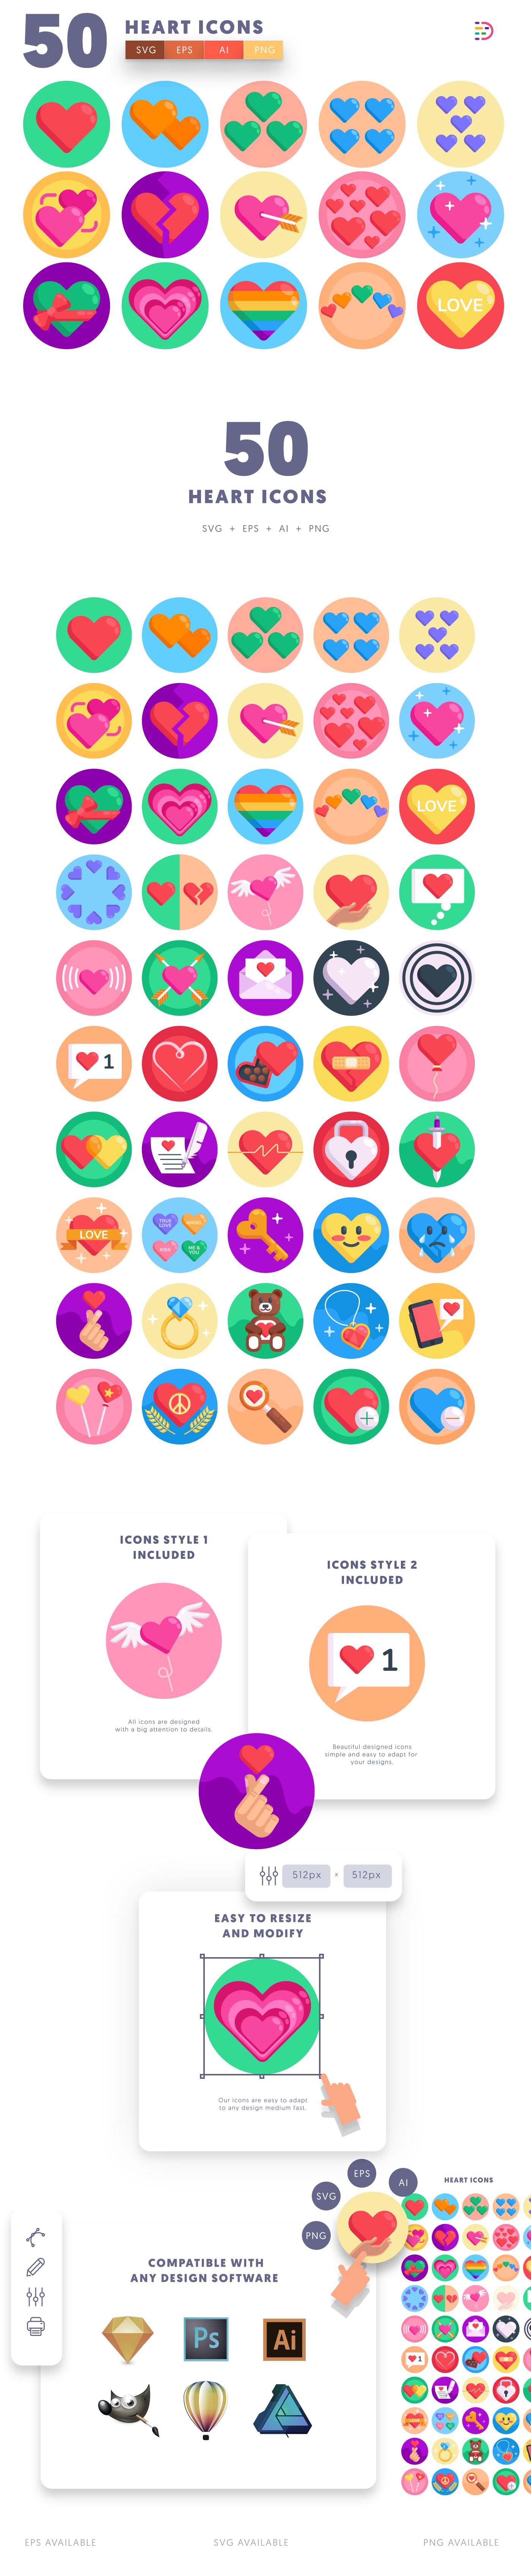 Heart icons info graphic